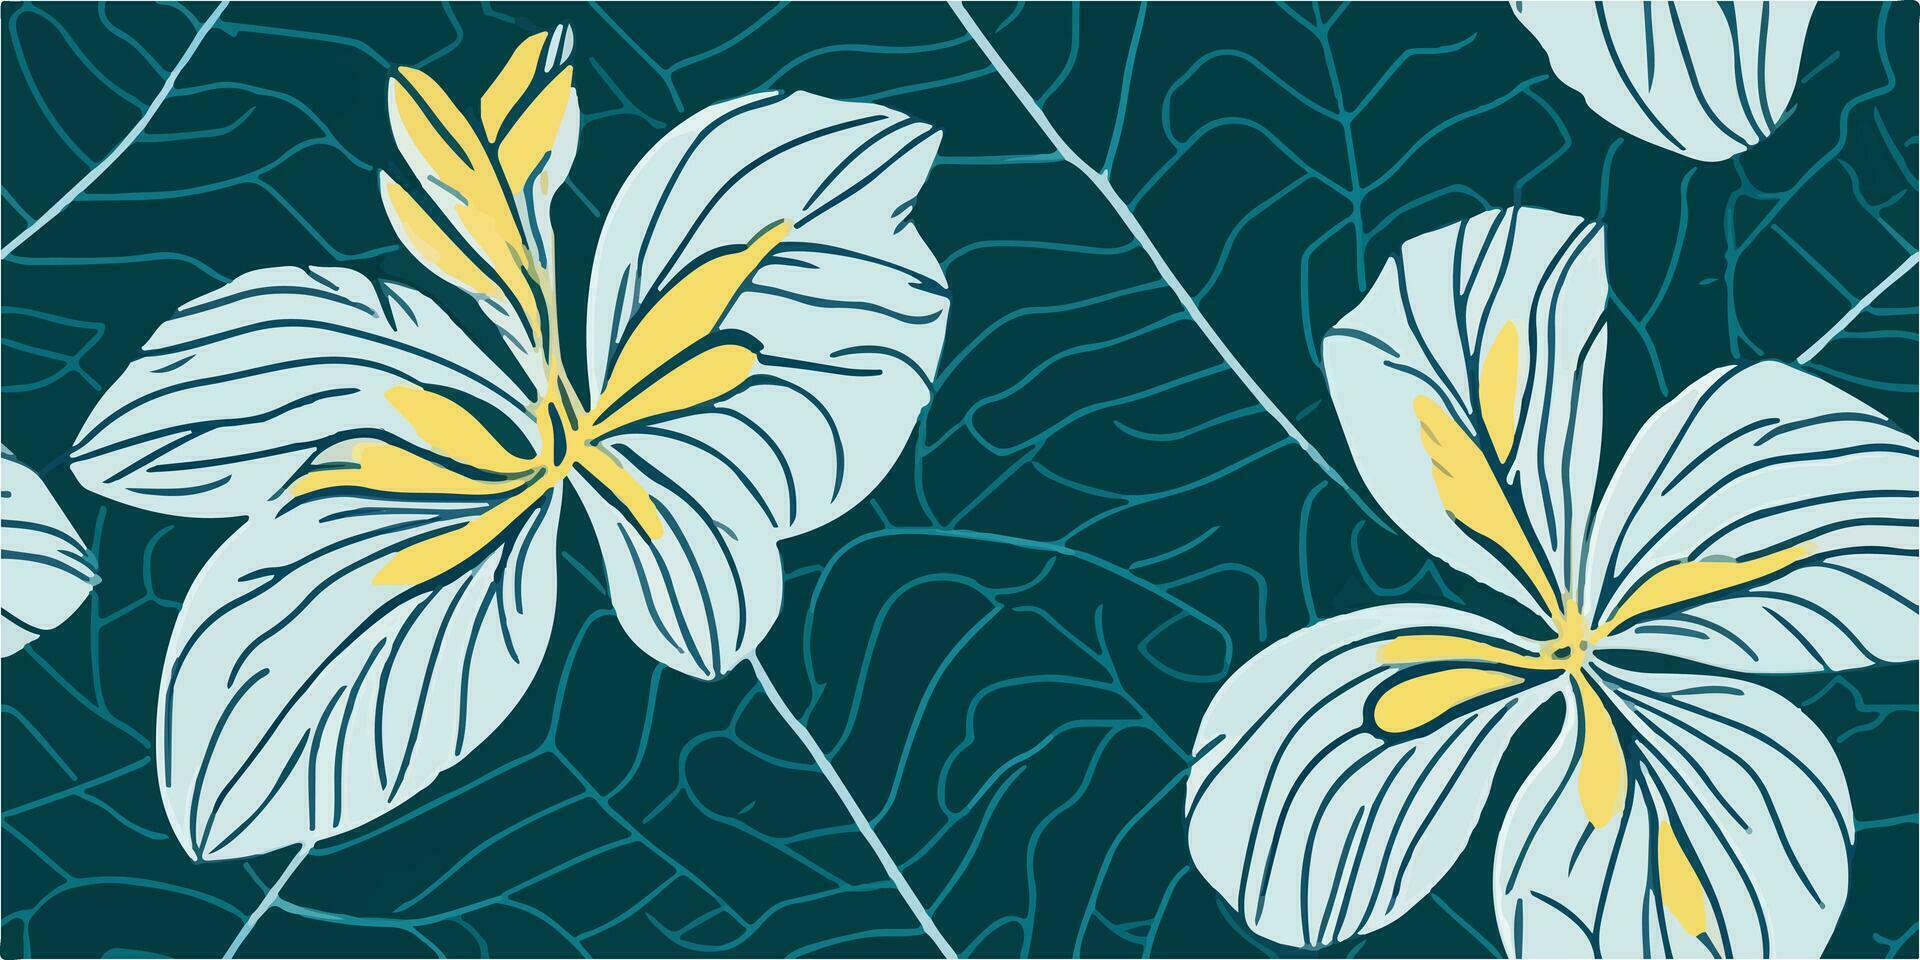 Artistic Whispers. Hand-Drawn Frangipani Flowers Patterns for Your Summer Artwork vector